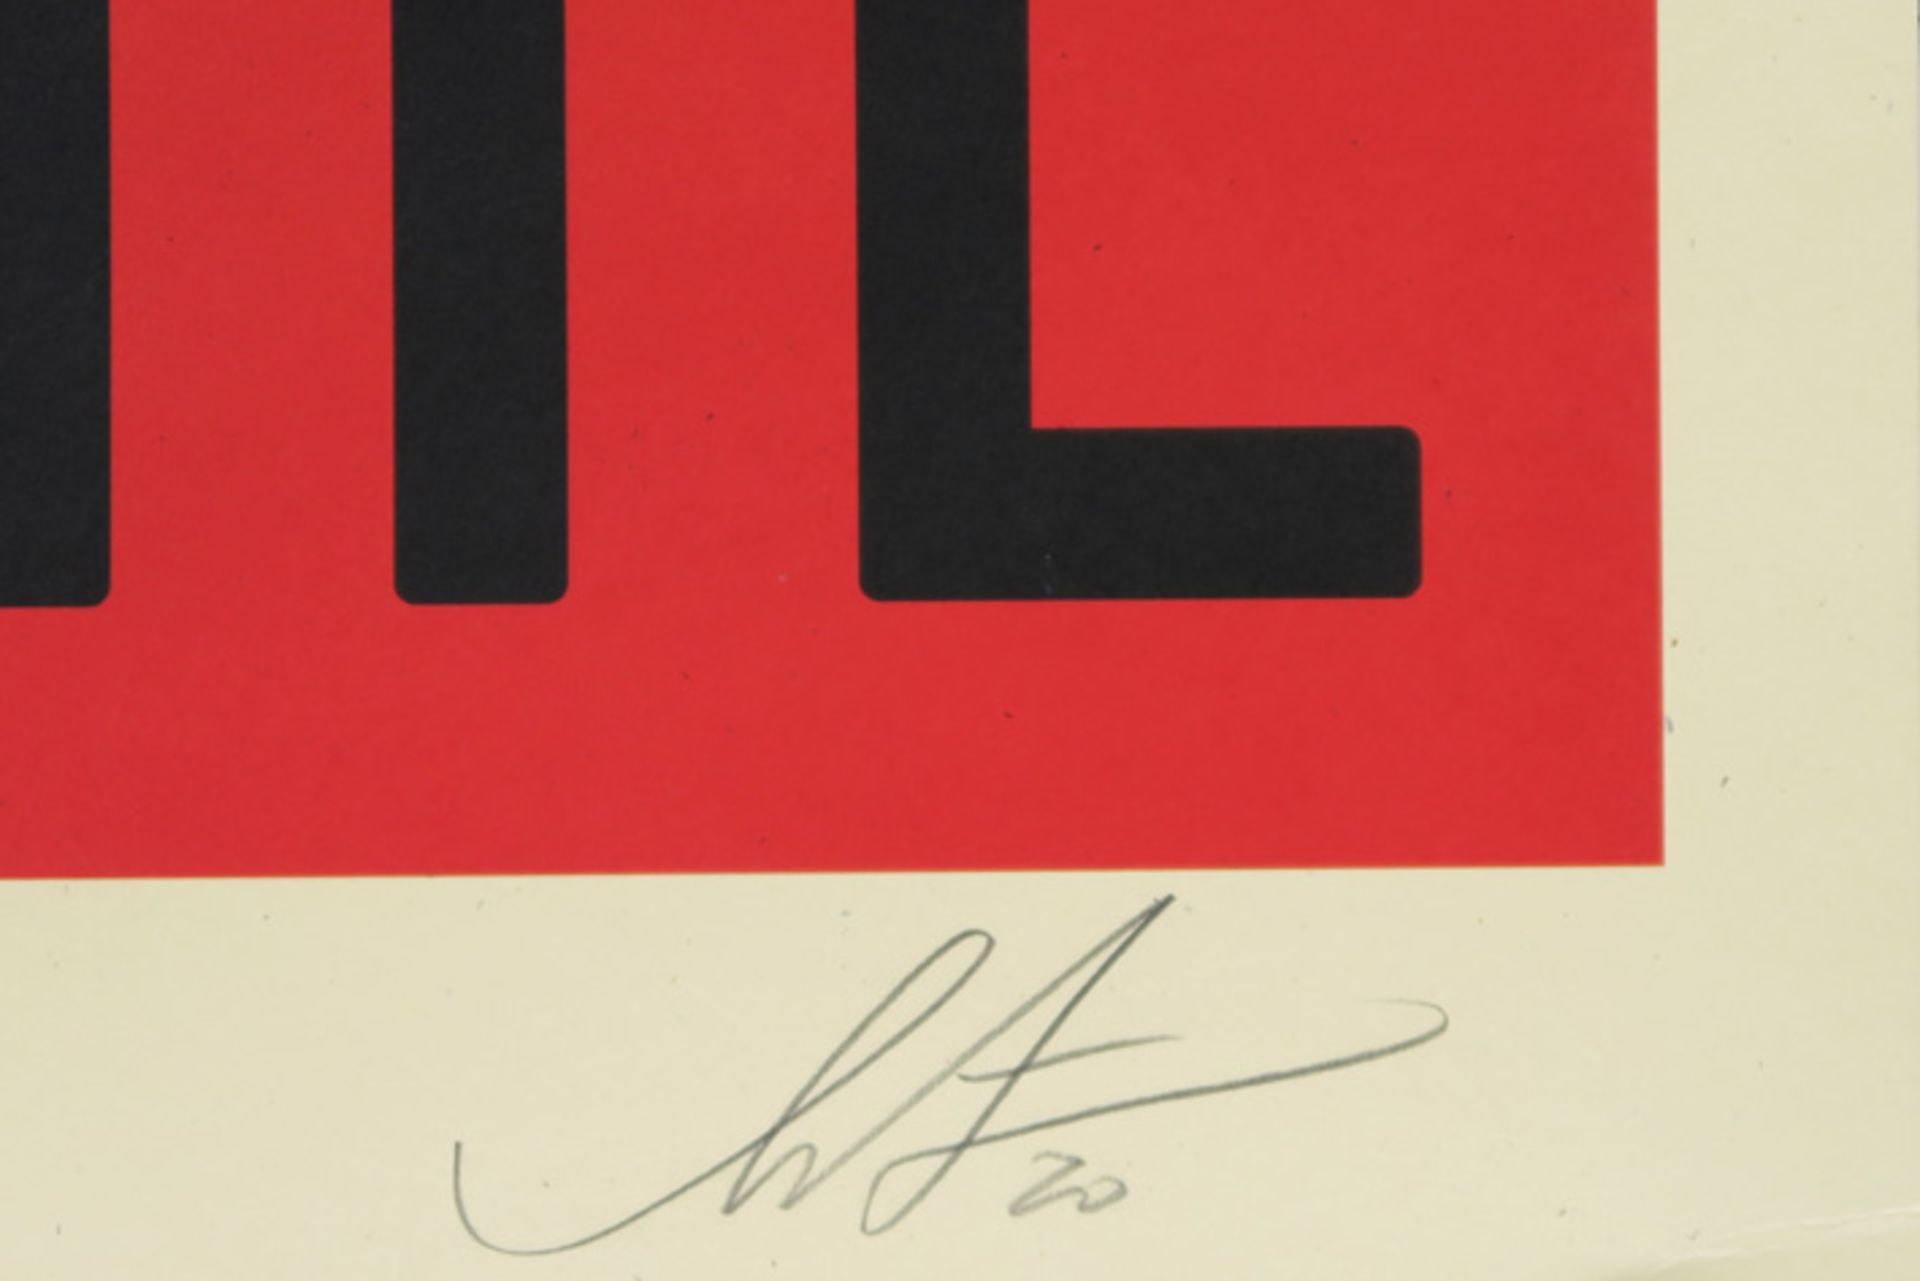 Obey signed "Liberté Egalité Fraternité" offset lithograph in colors - signed and dated 2020 || OBEY - Image 2 of 2